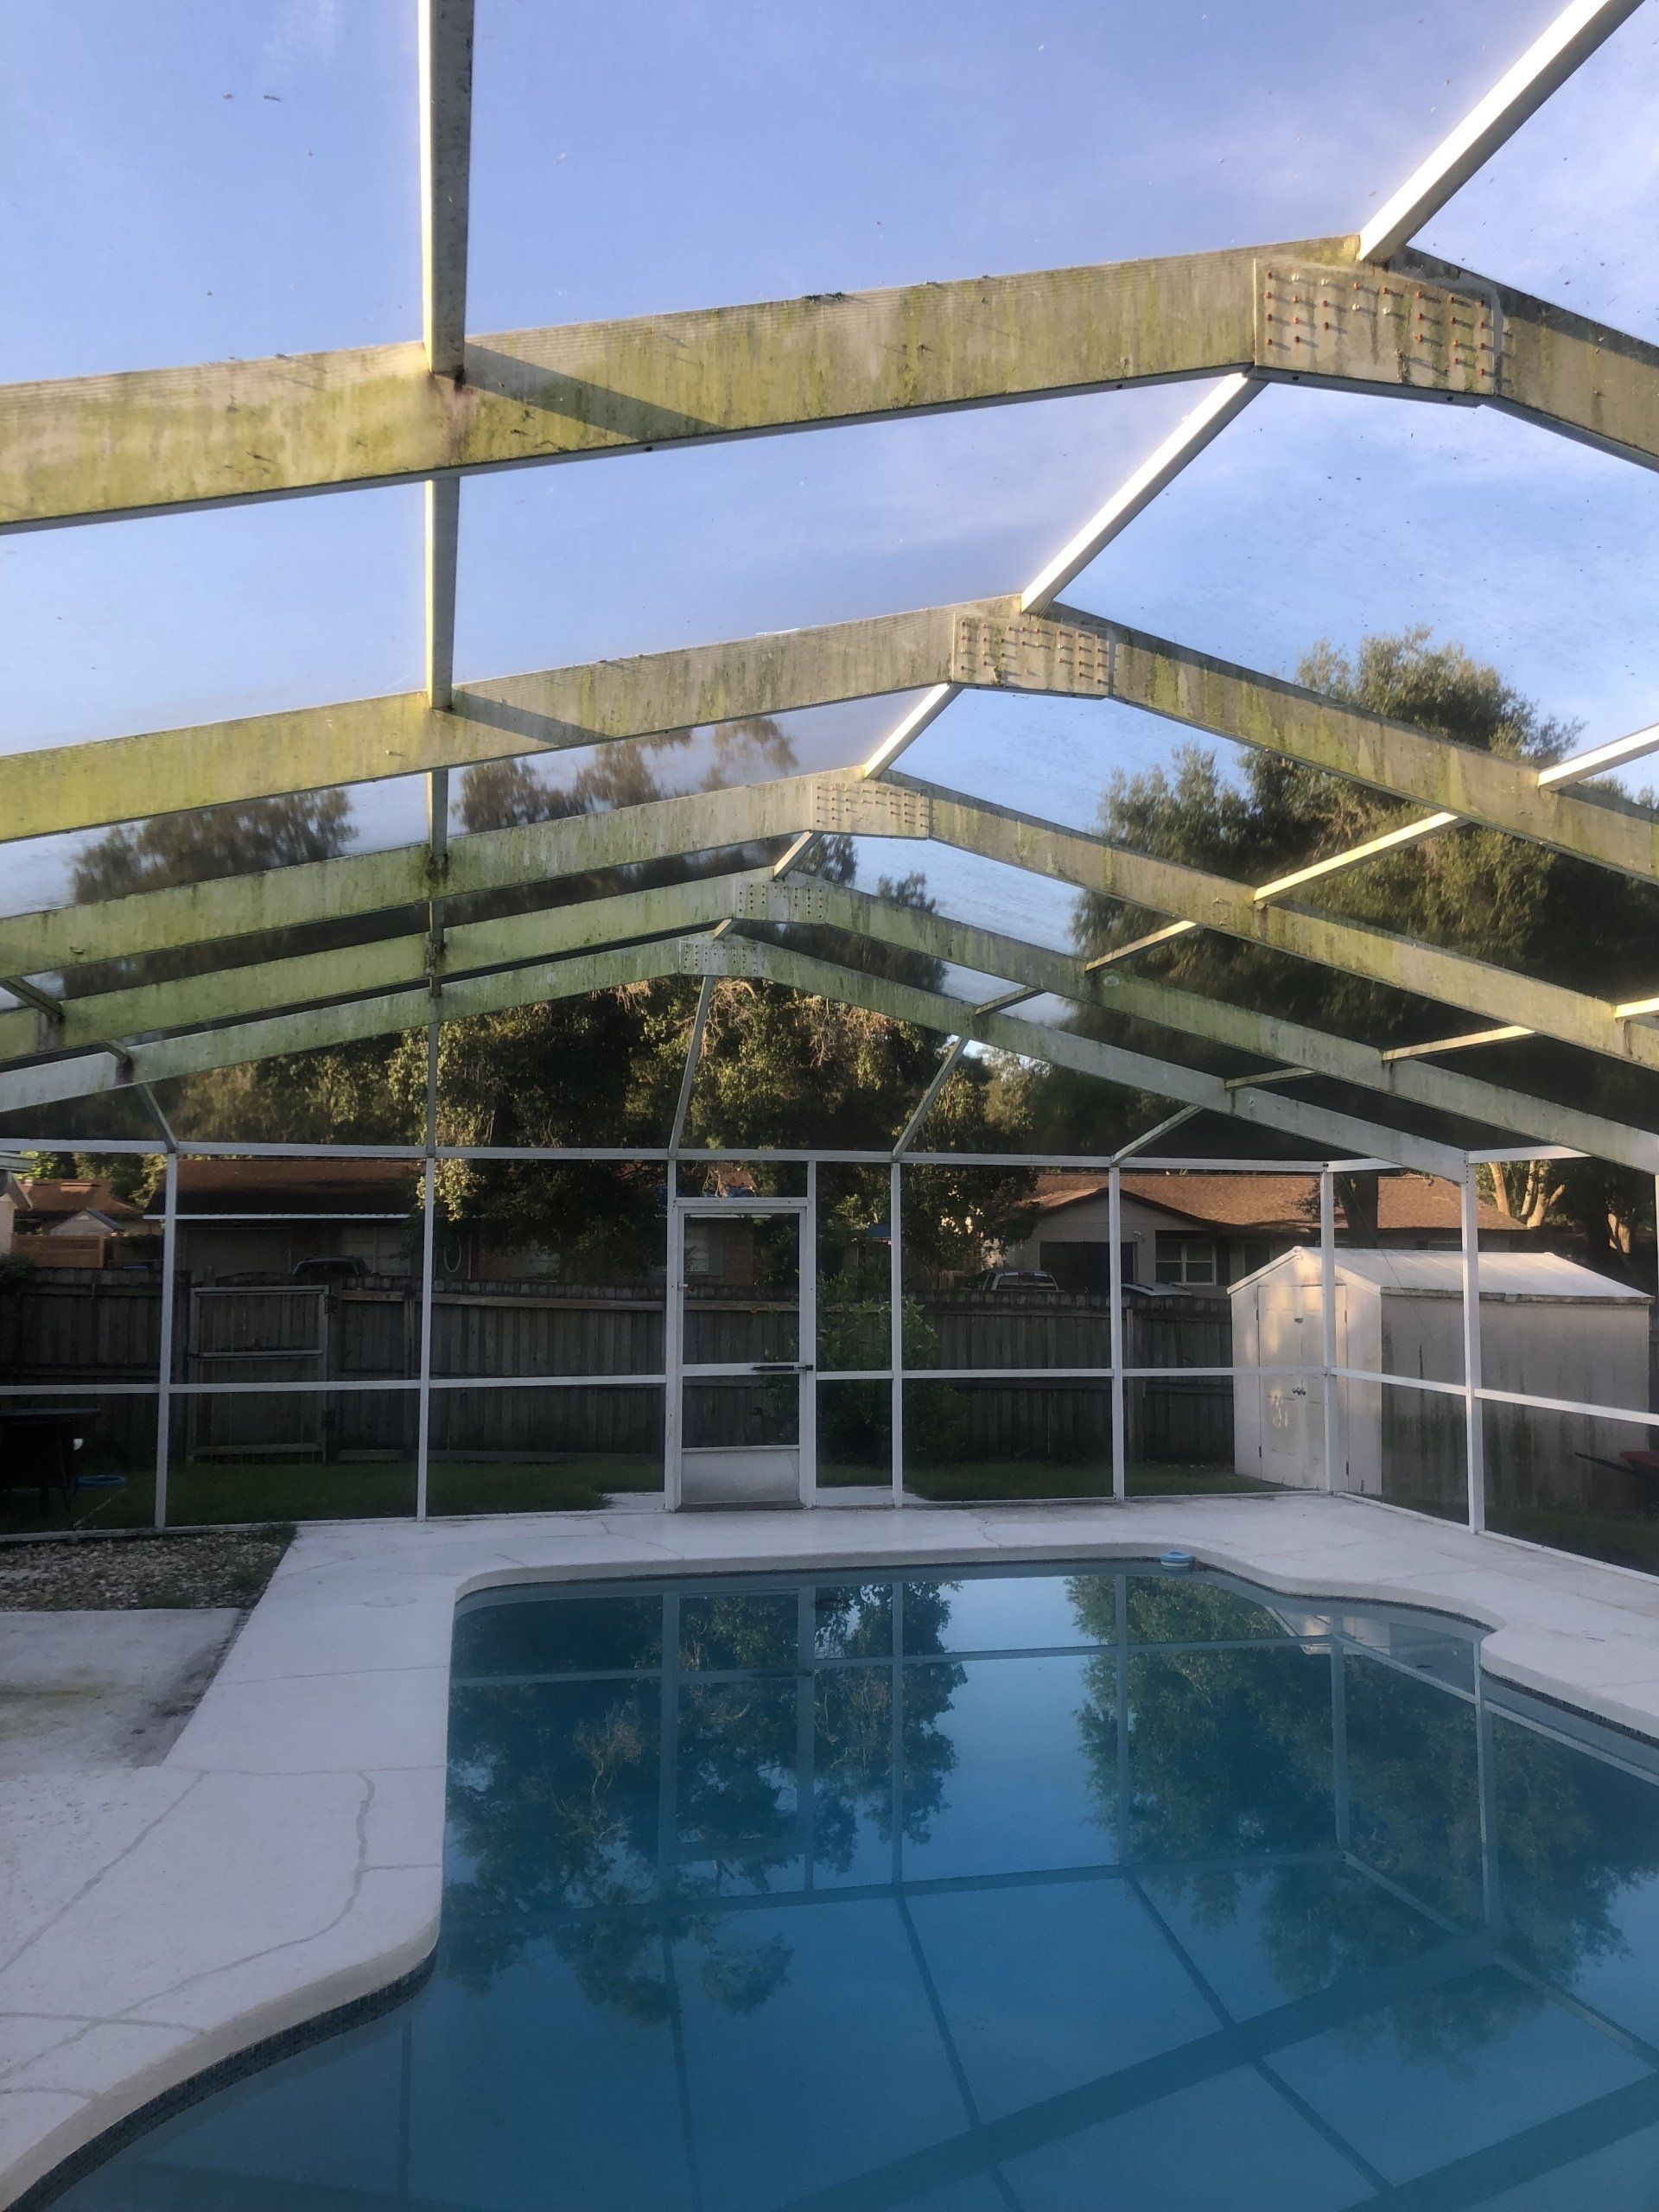 Pool cage cleaning | Tampa, FL | First Response Pressure Wash